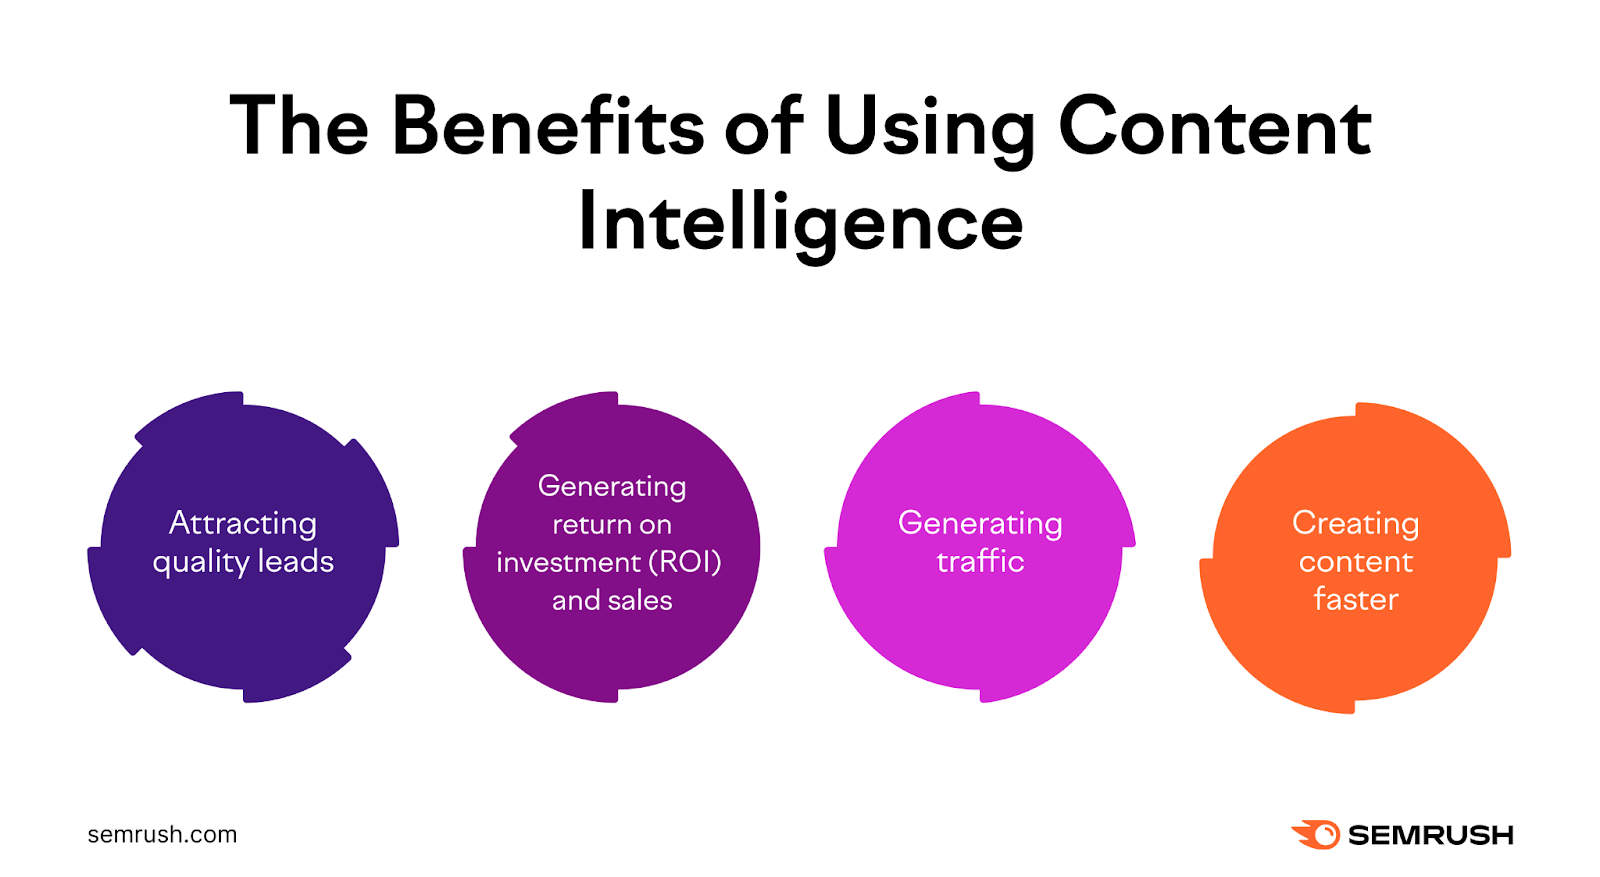 an image listing the benefits of using content intelligence